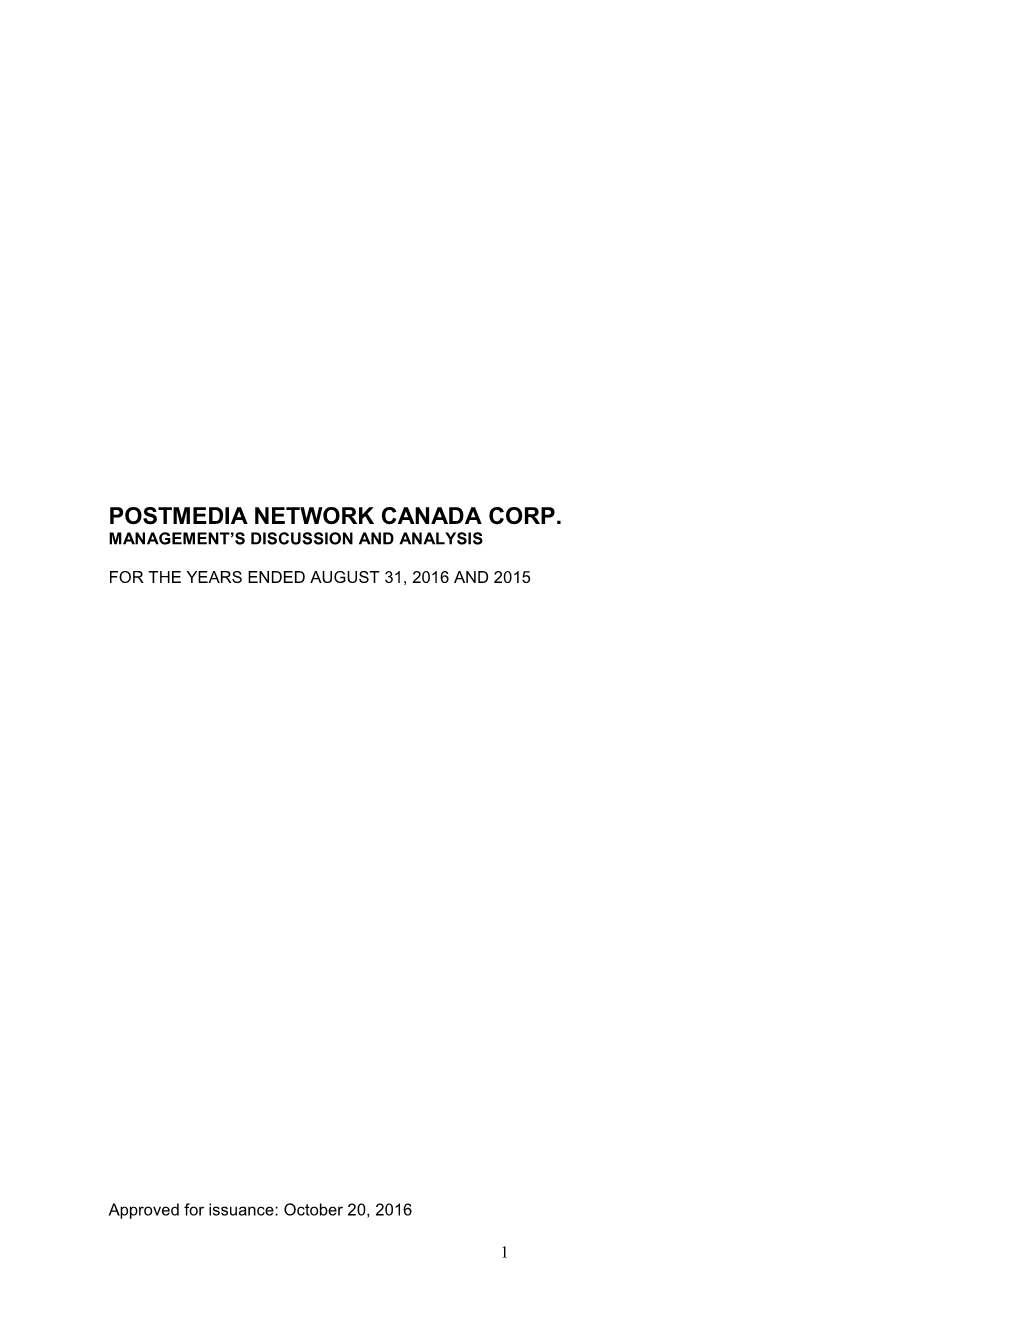 Postmedia Network Canada Corp. Management’S Discussion and Analysis